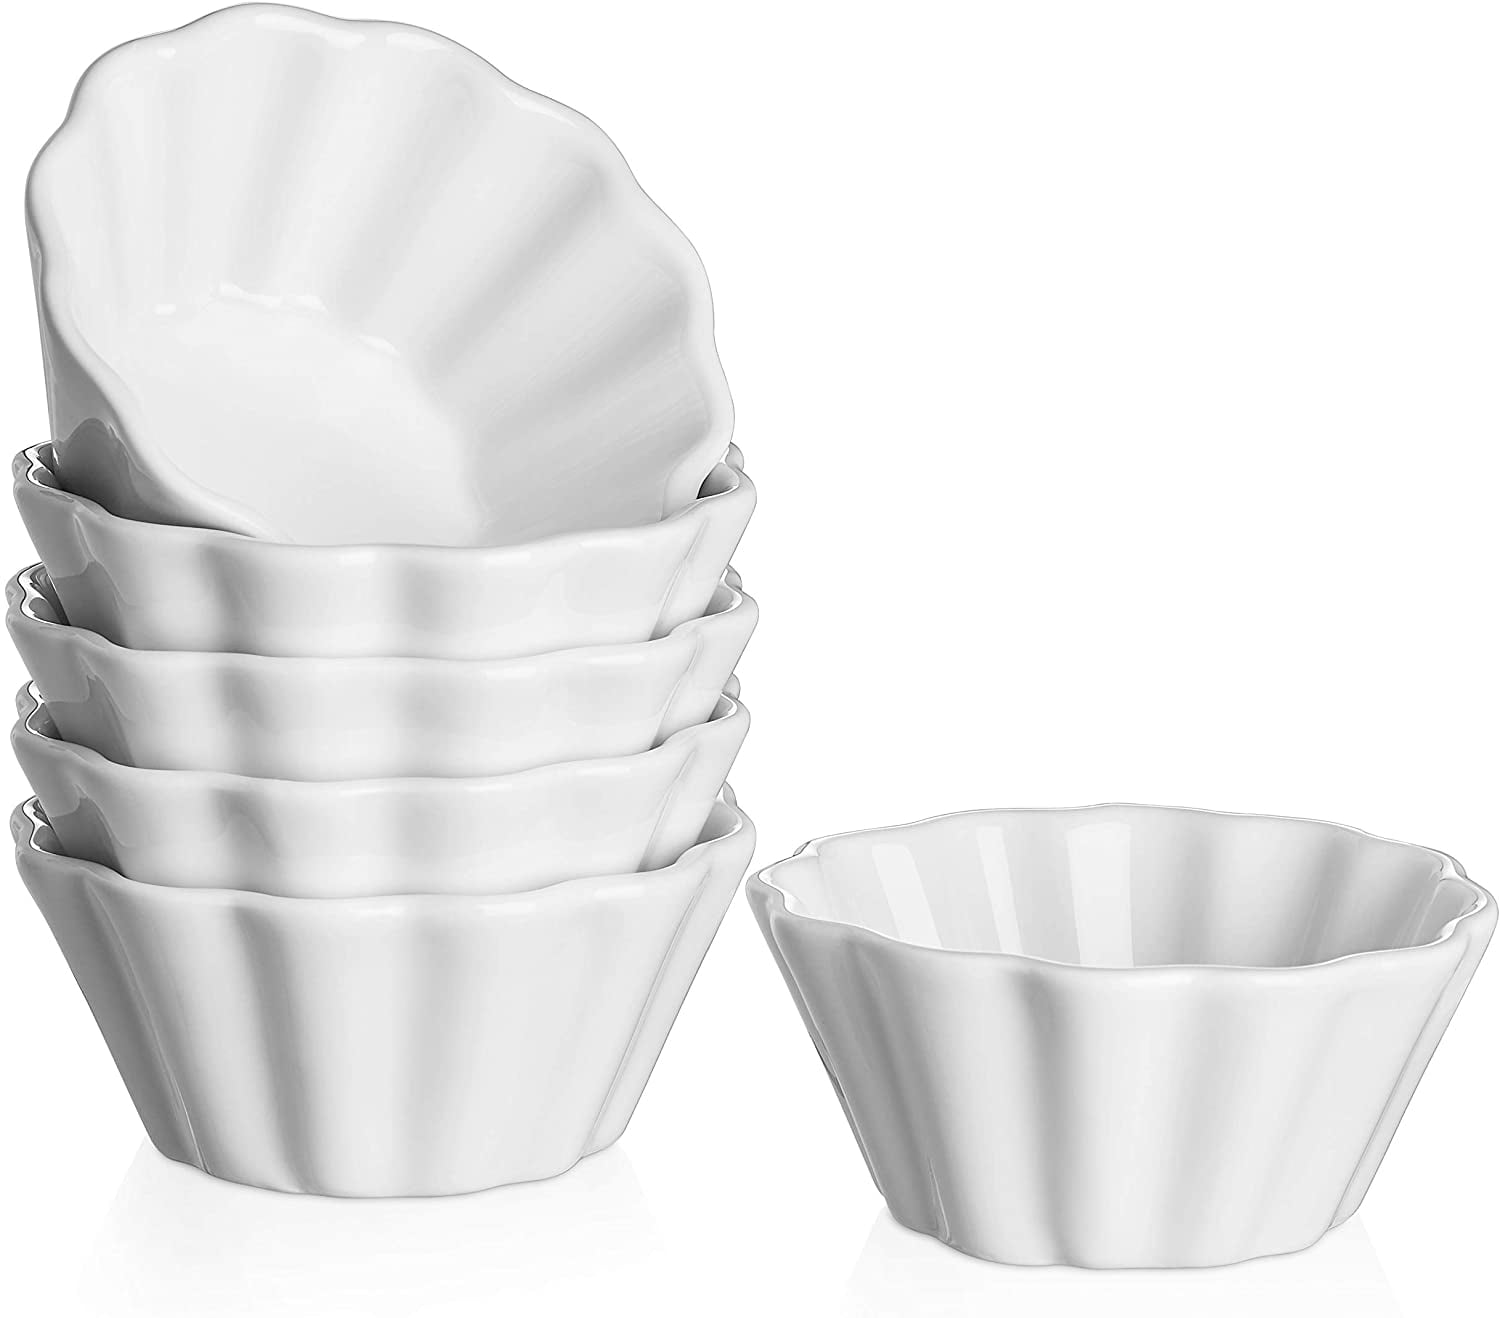 Ceramic Ramekins Set of 2 Souffle Pots Small Ramekins Bowls for Dips & Nibbles Oven Proof Cooking Dishes Microwave & Oven Safe with Lids M&W 